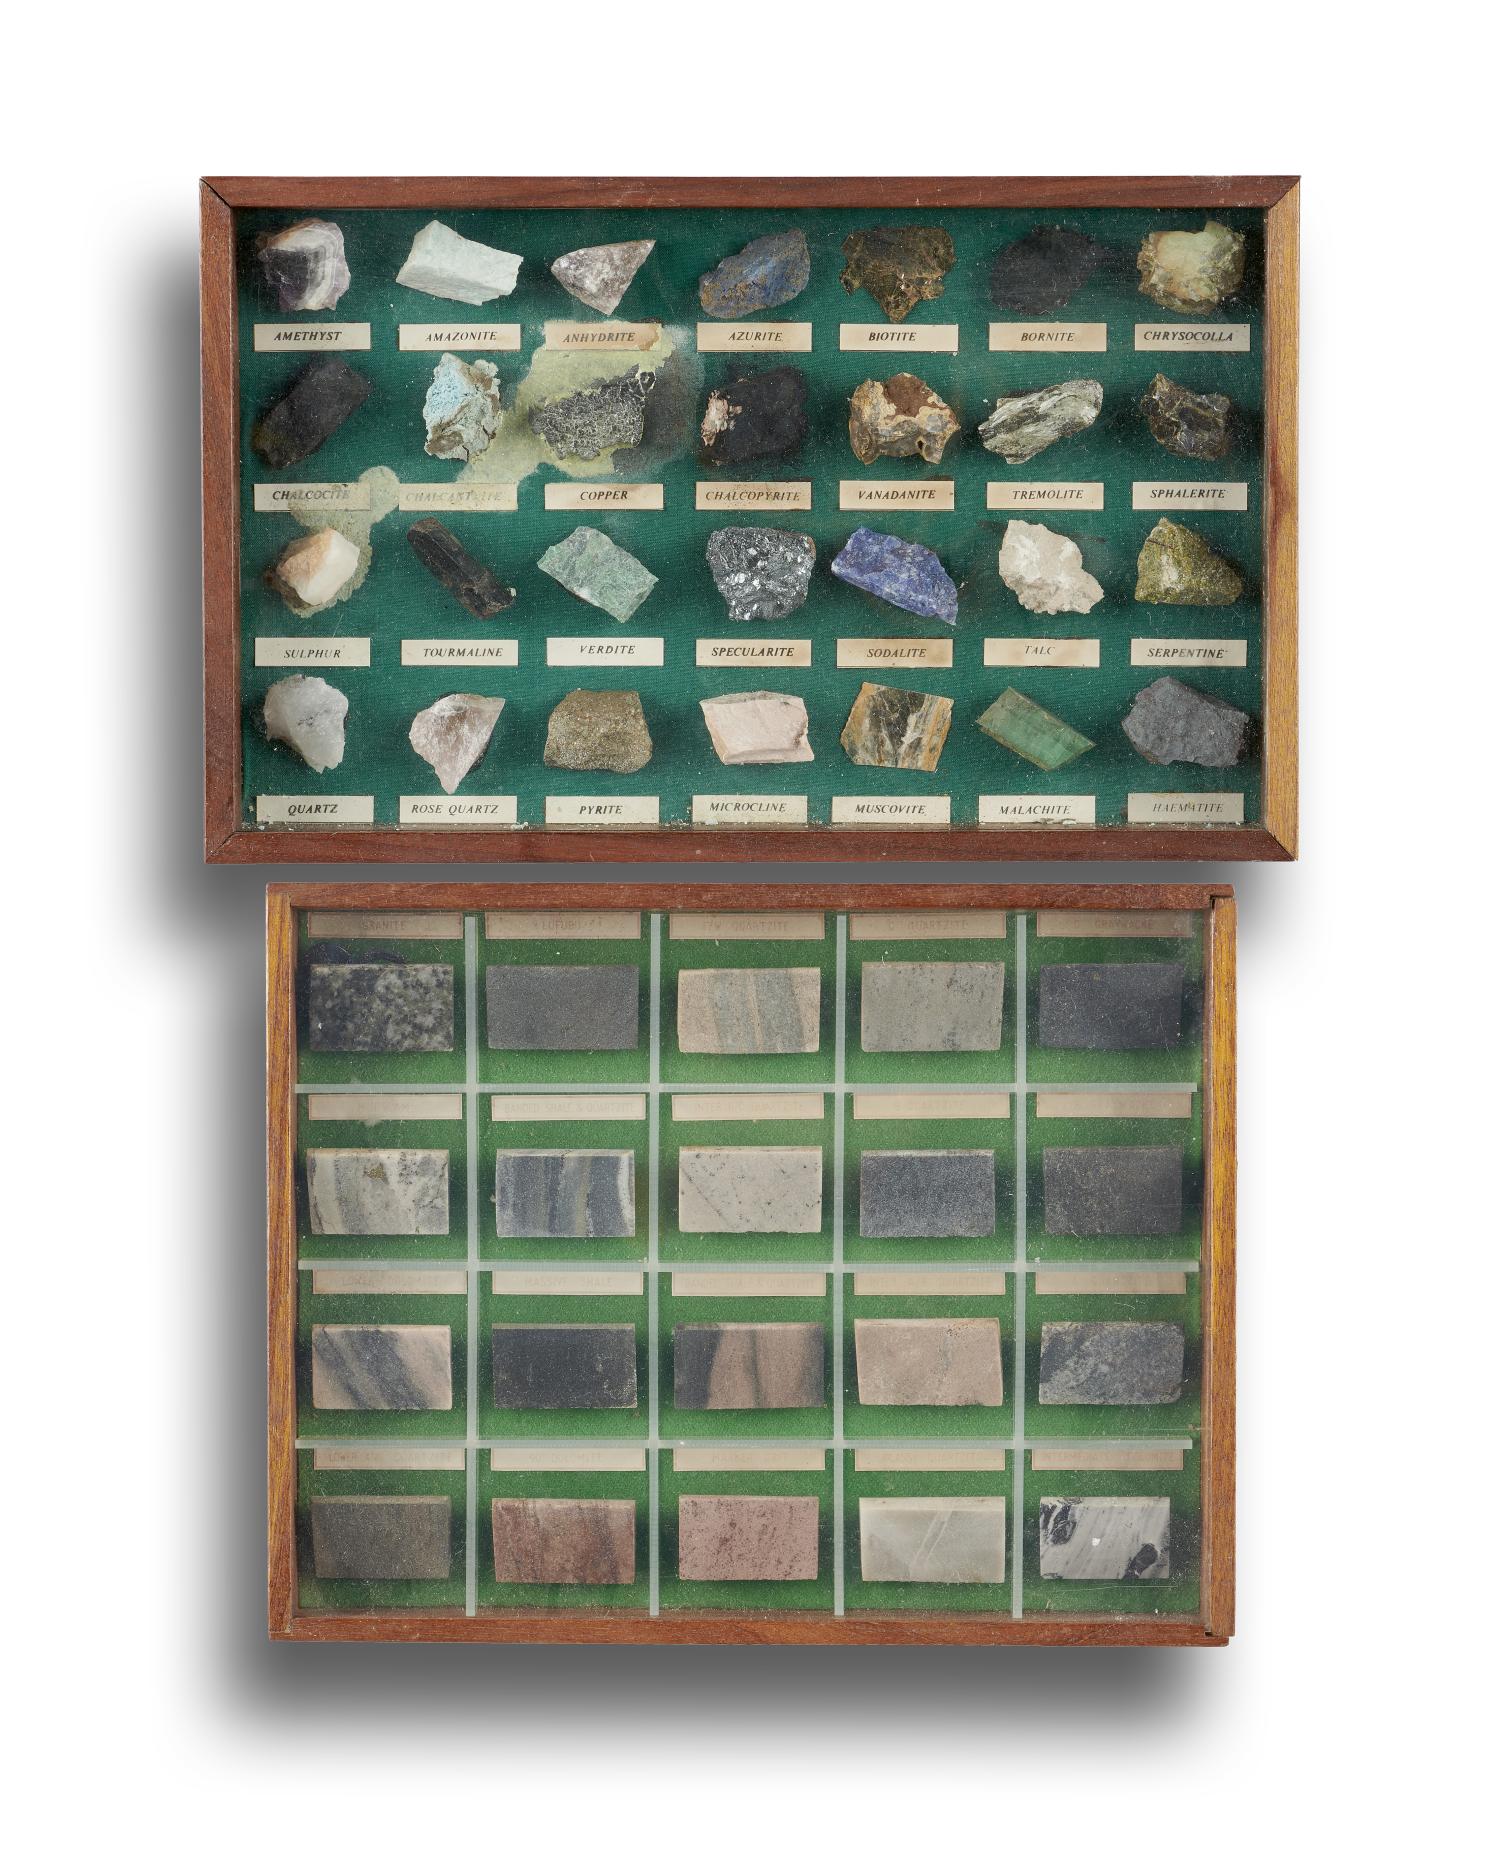 Minerals: A geological collectionmid 20th centuryhoused in two display boxes